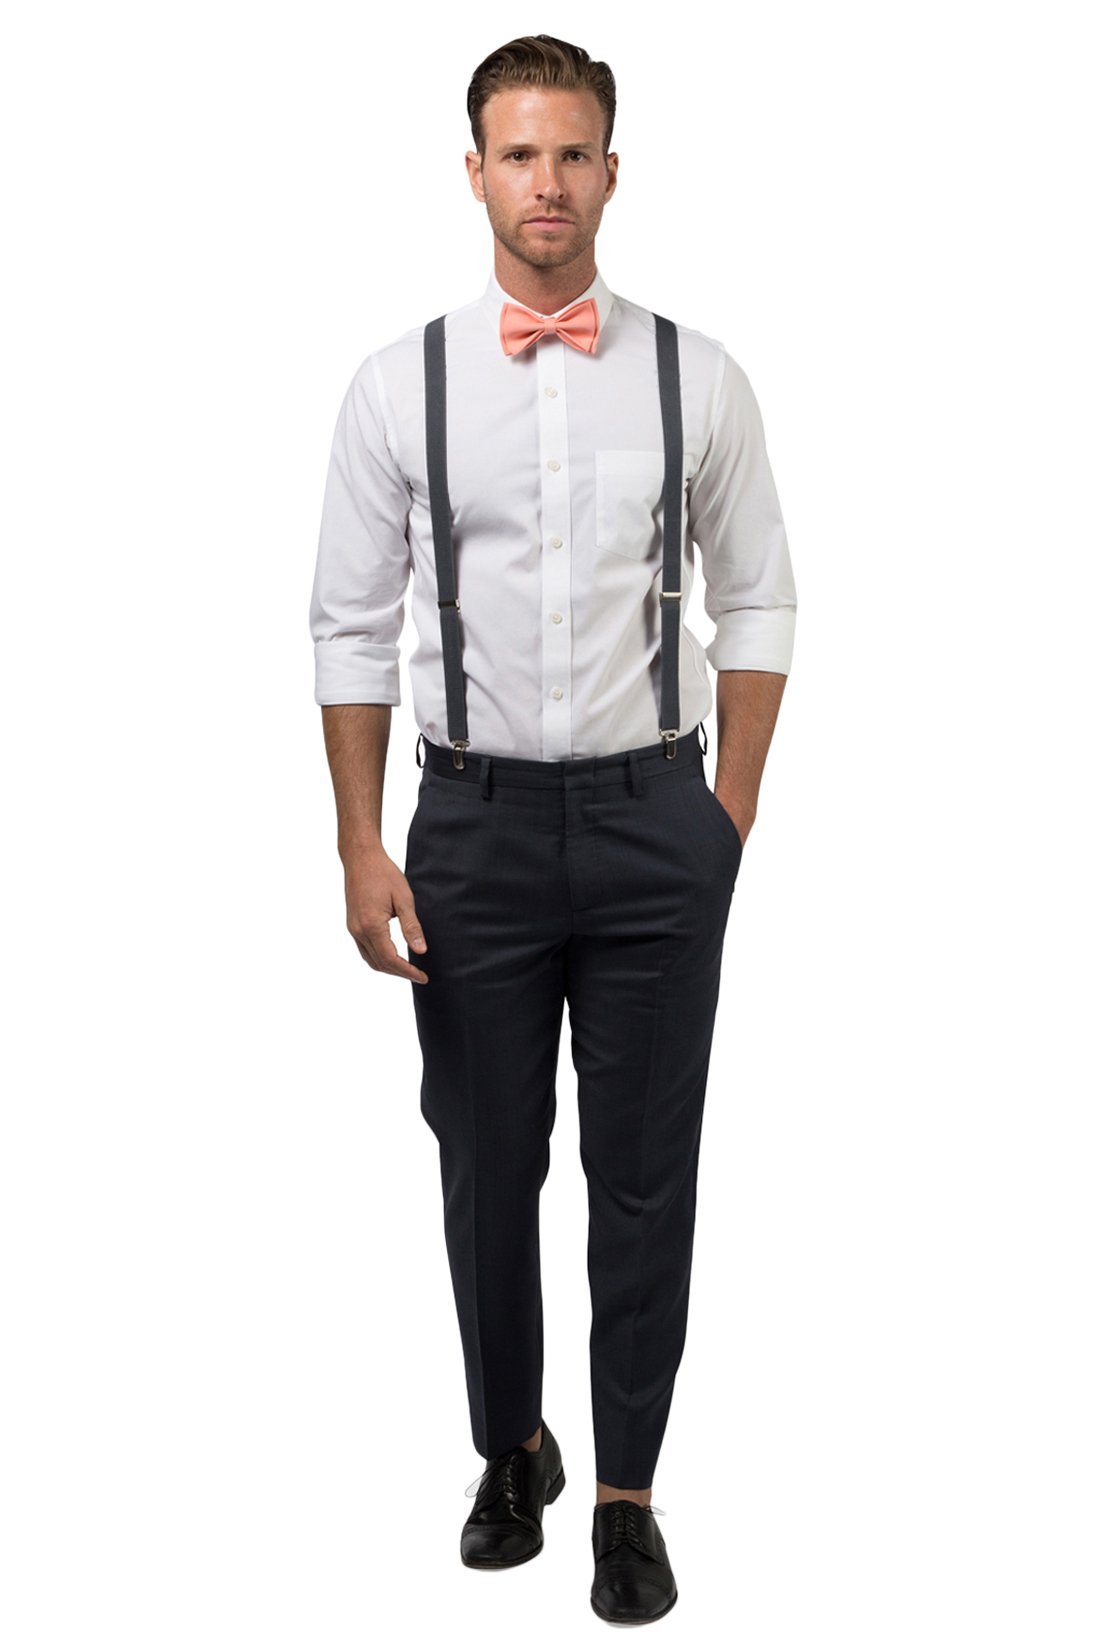 Charcoal Suspenders & Peach Coral Bow Tie